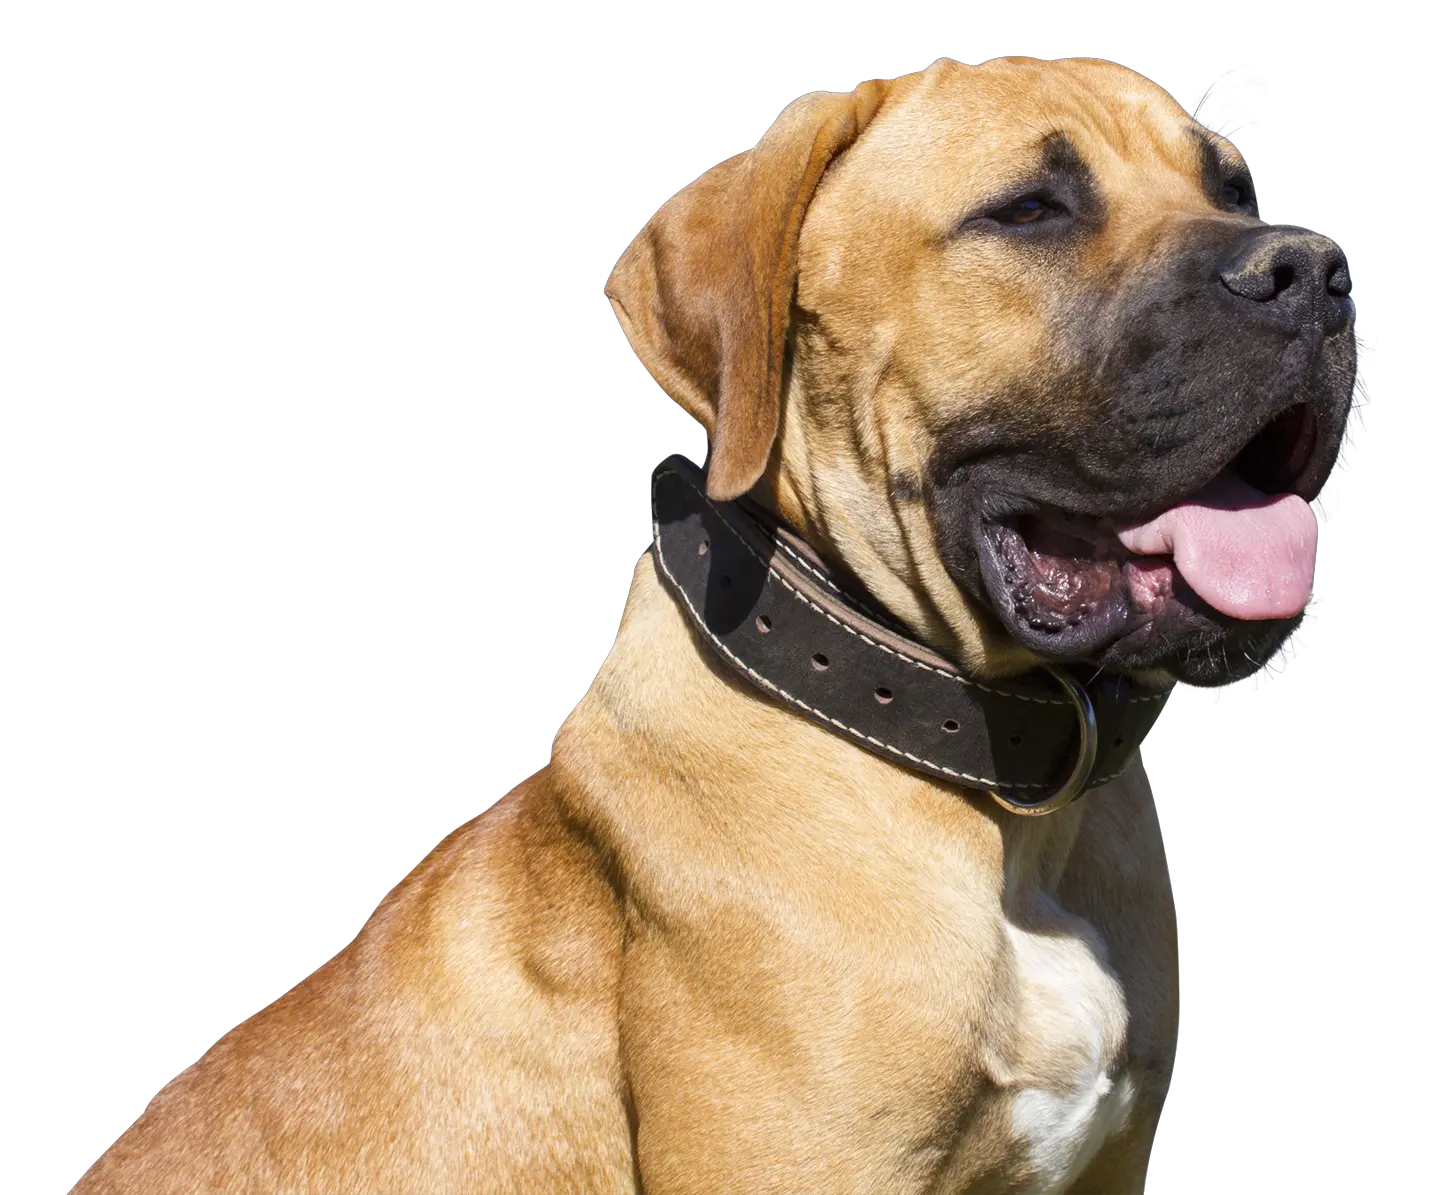 Download Dog Png Png Images Hd Of Dogs Png Image With No Bulldog Png Dogs Png